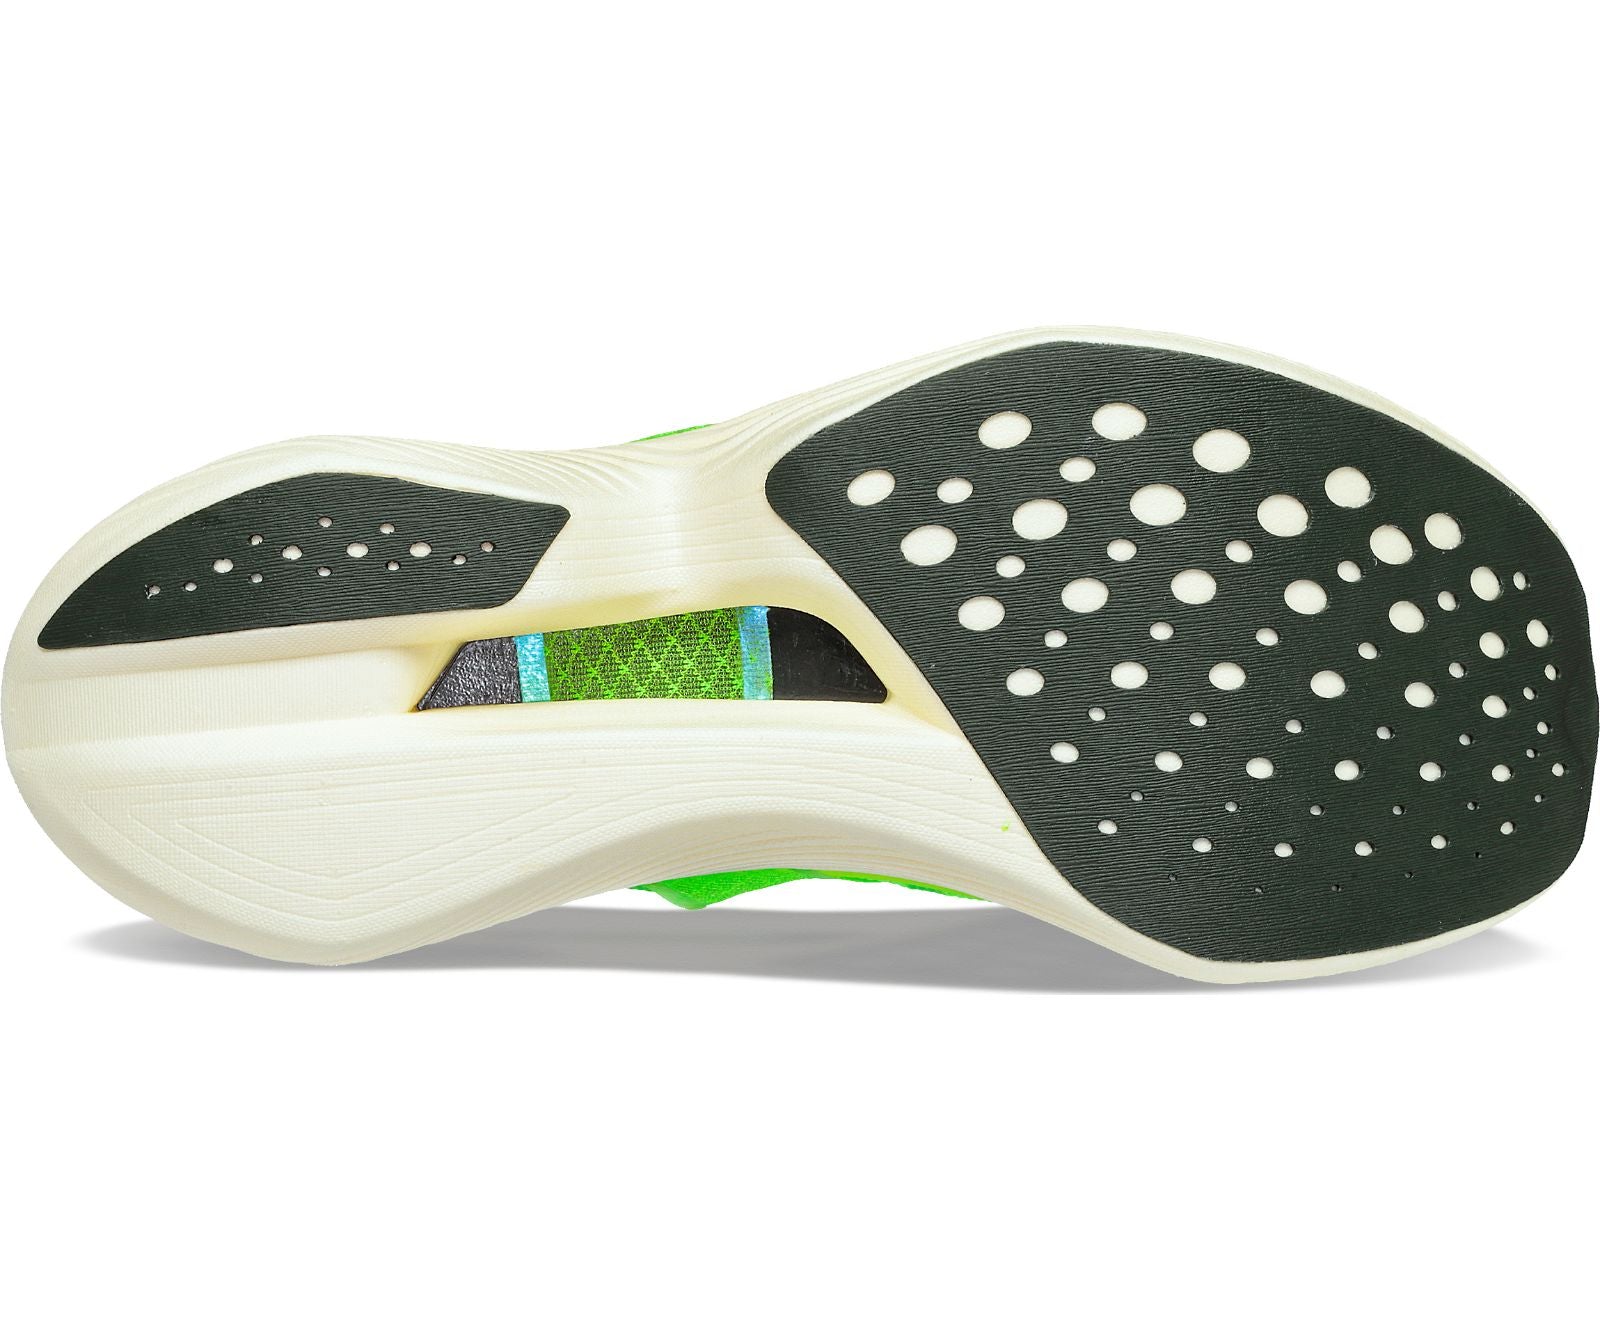 Bottom (outer sole) view of the Saucony Men's Endorphin Elite in the color Slime